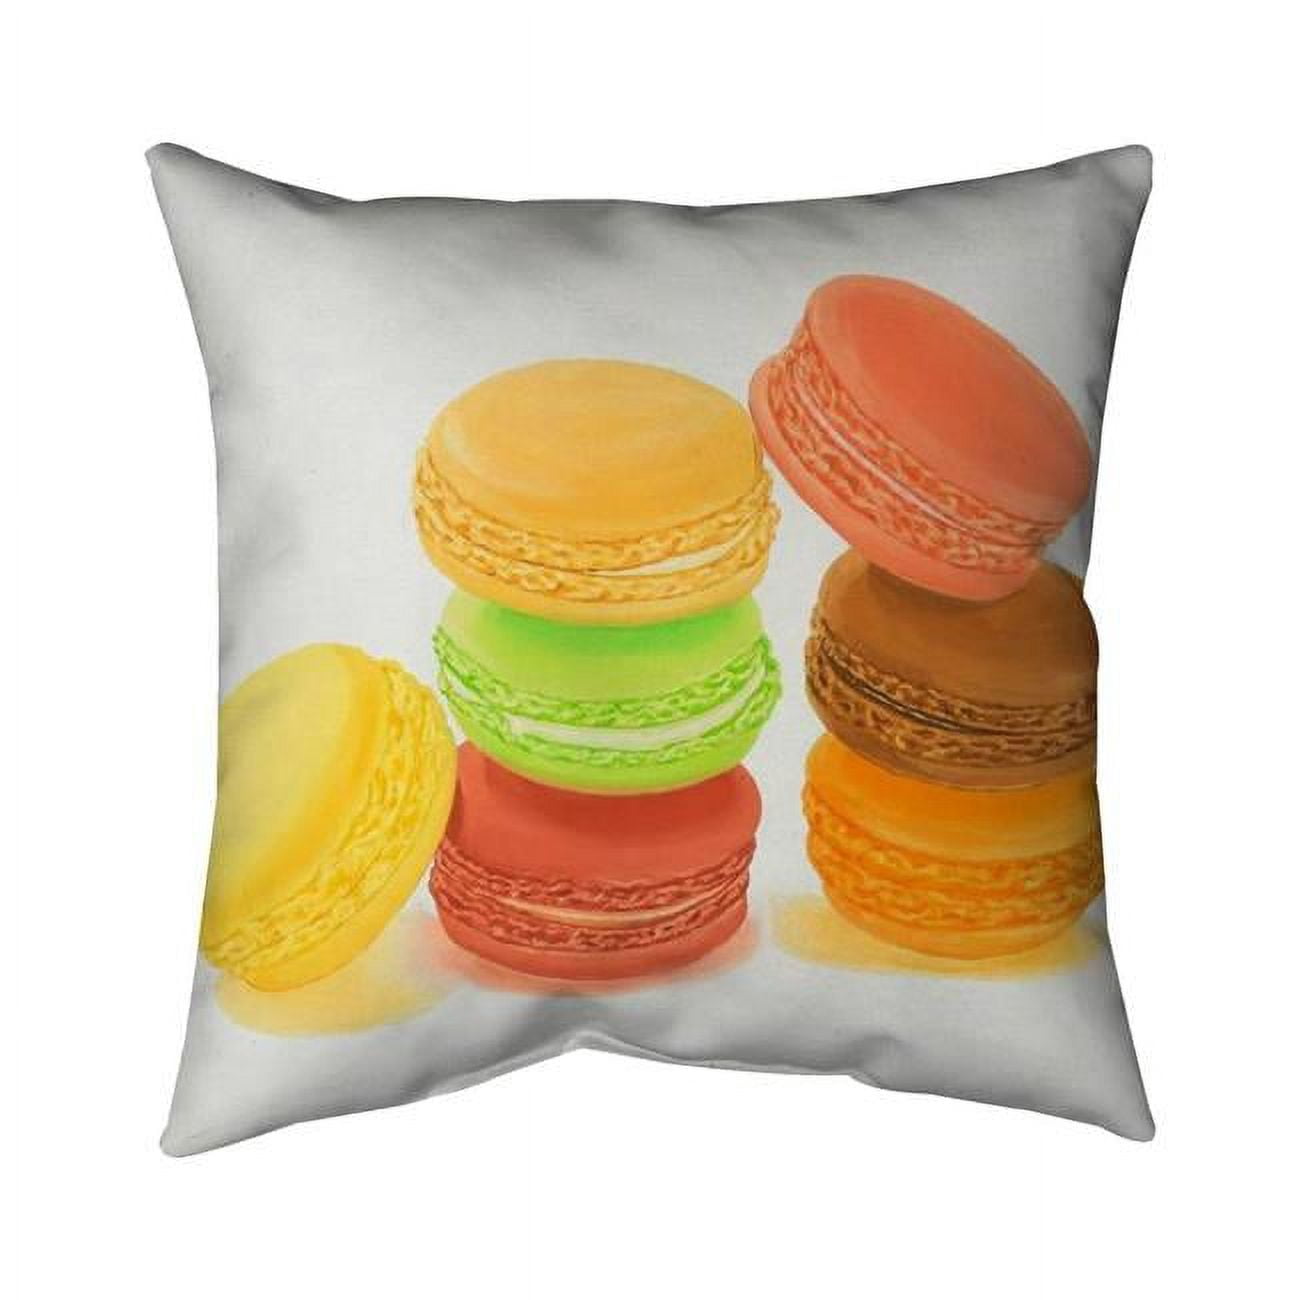 Begin Home Decor 5543-1616-GA65 16 x 16 in. Delicious Macaroons-Double Sided Print Indoor Pillow Cover